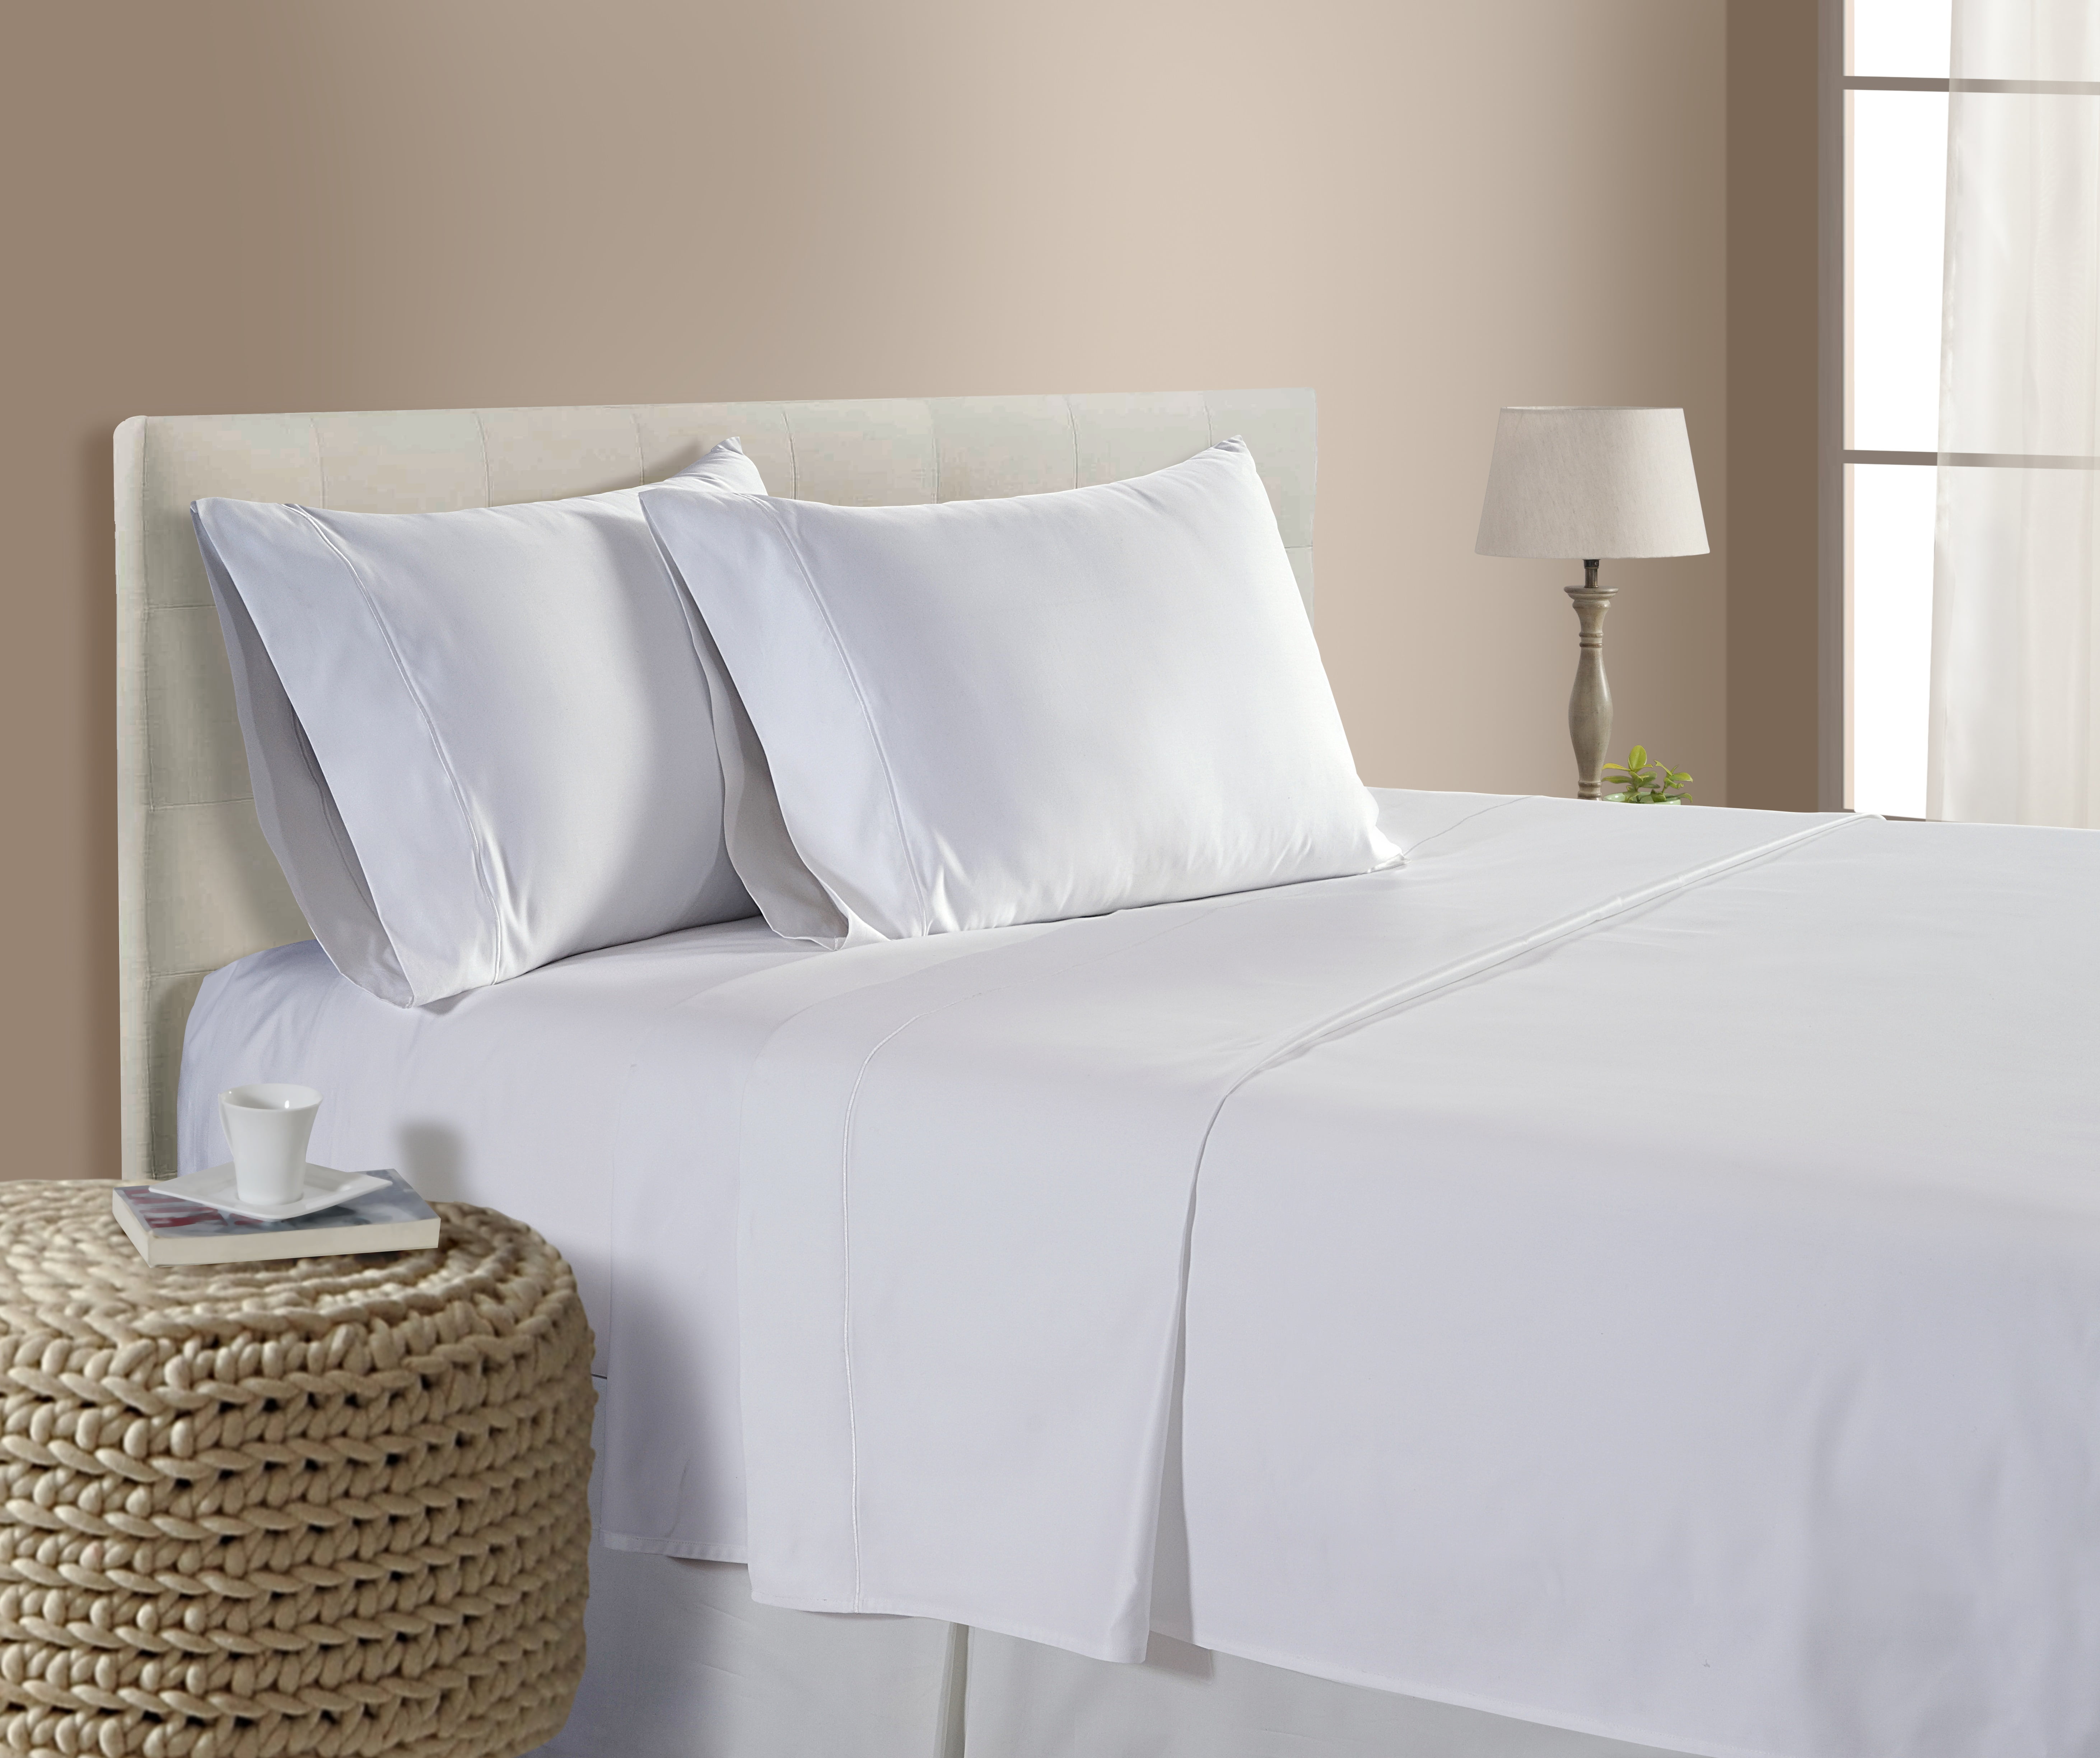 WHITE SOLID SHEET SET 800 THREAD COUNT 100% EGYPTIAN COTTON SELECT YOUR SIZE 